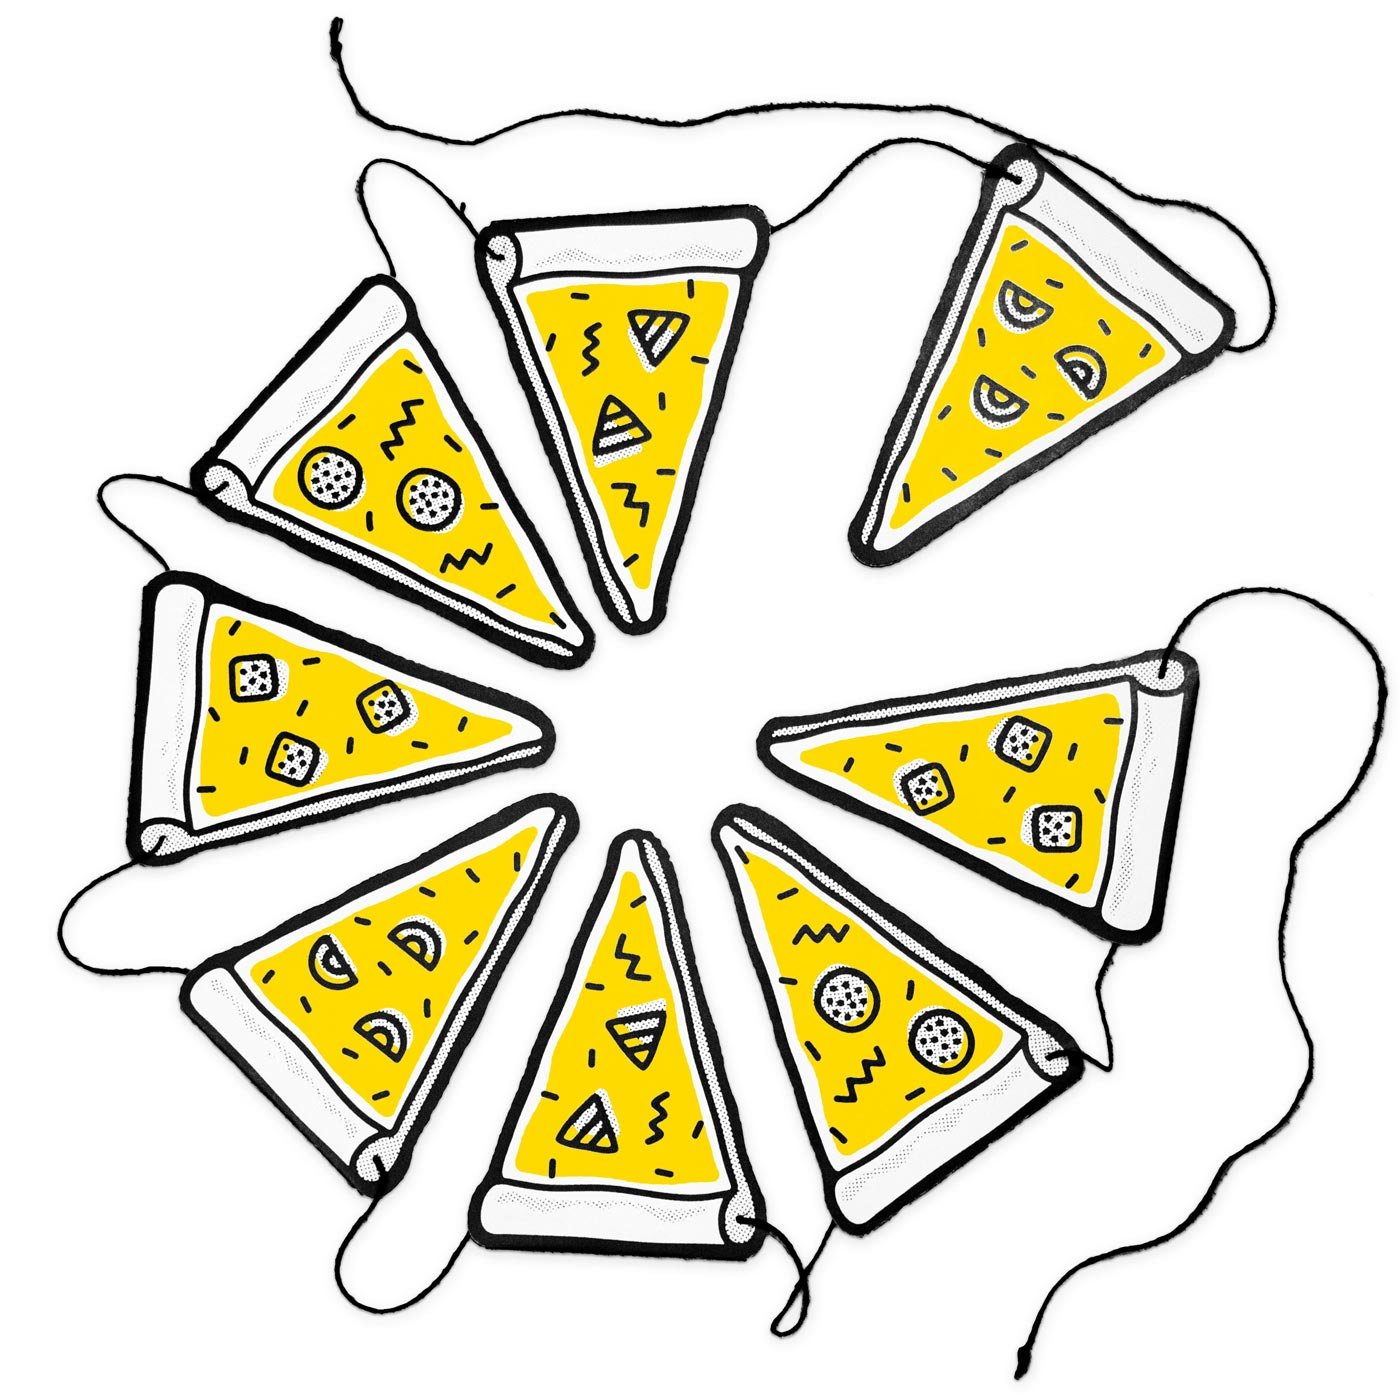 Image of Pizza Wimpelkette (bunting rope)